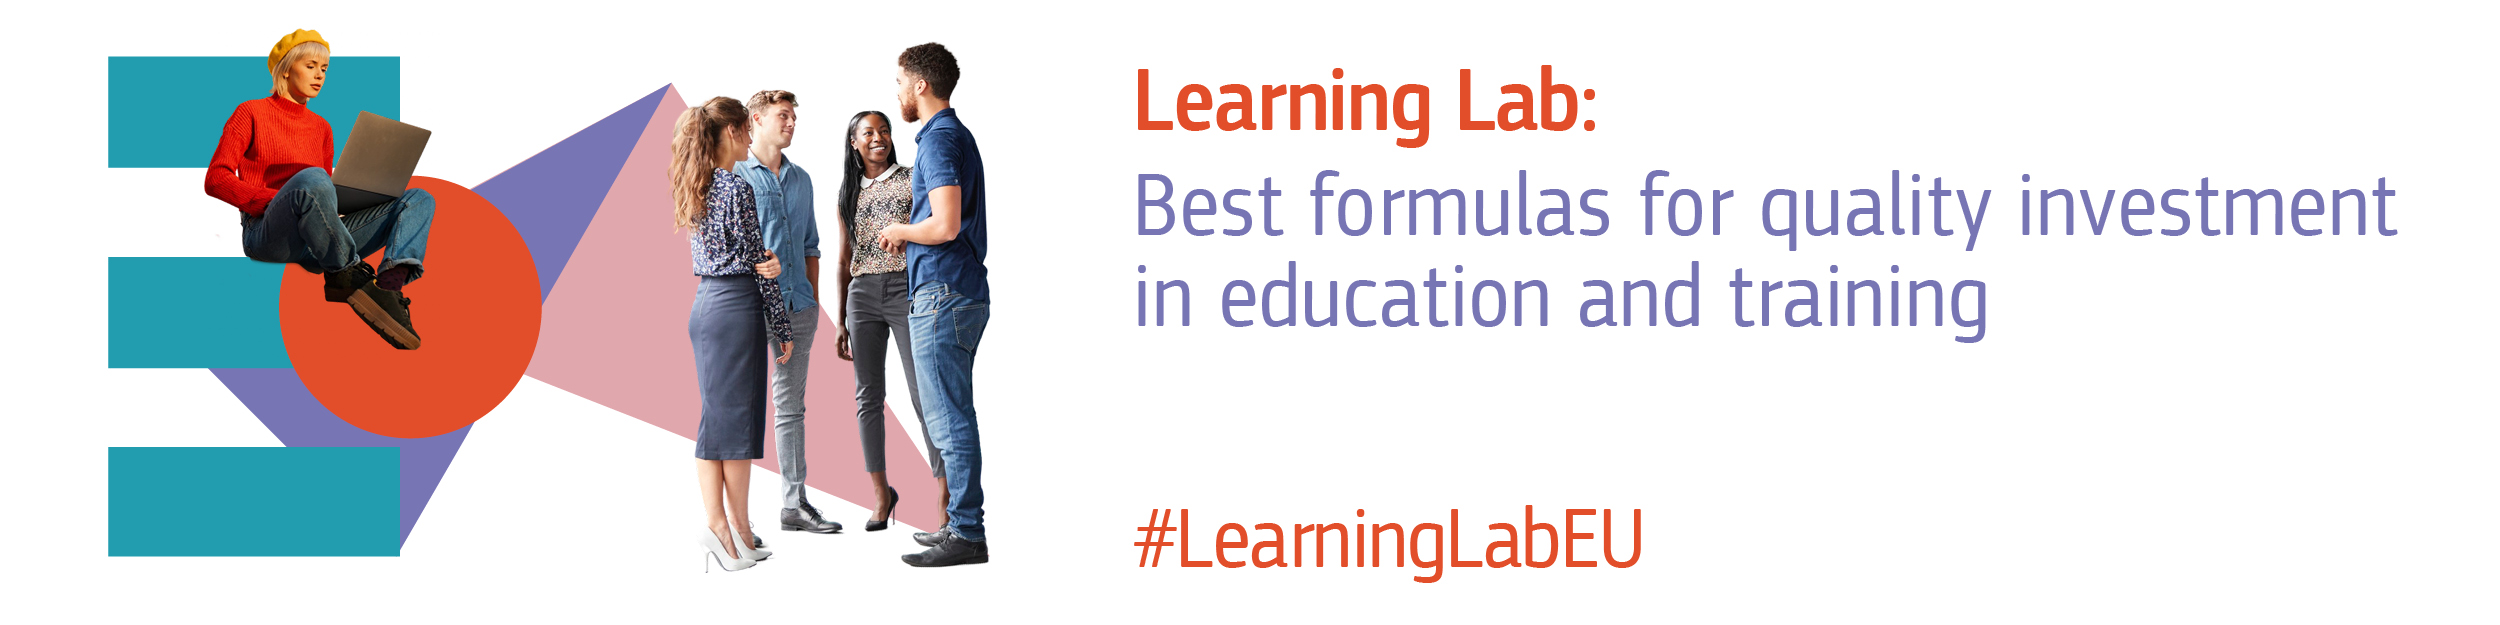 Learning Lab on Investing in Quality Education and Training